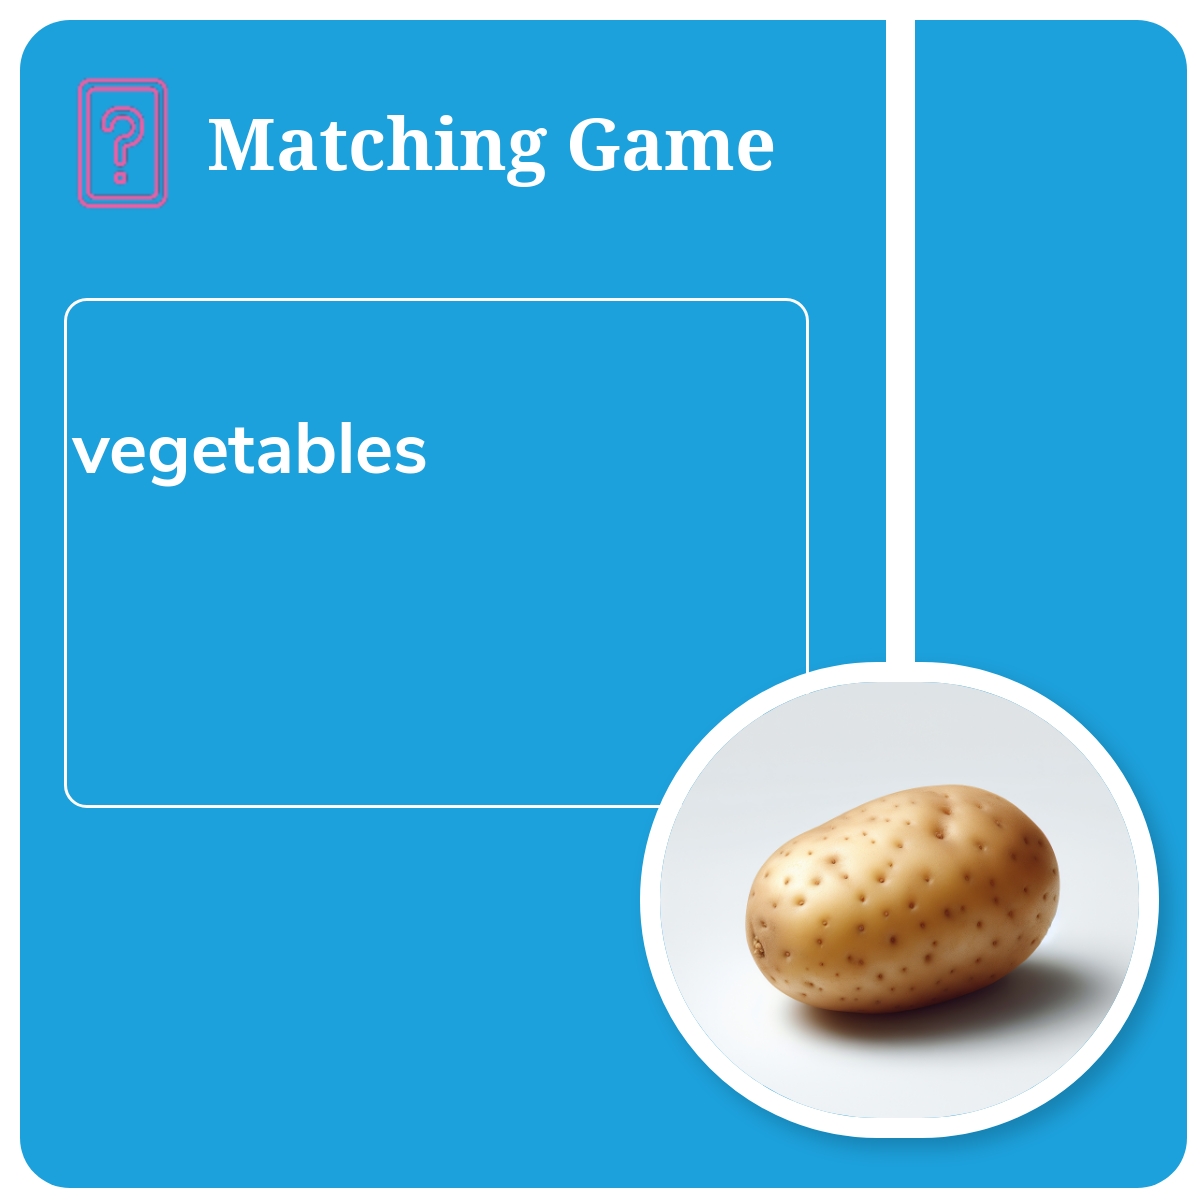 Matching Words to Definitions: vegetables